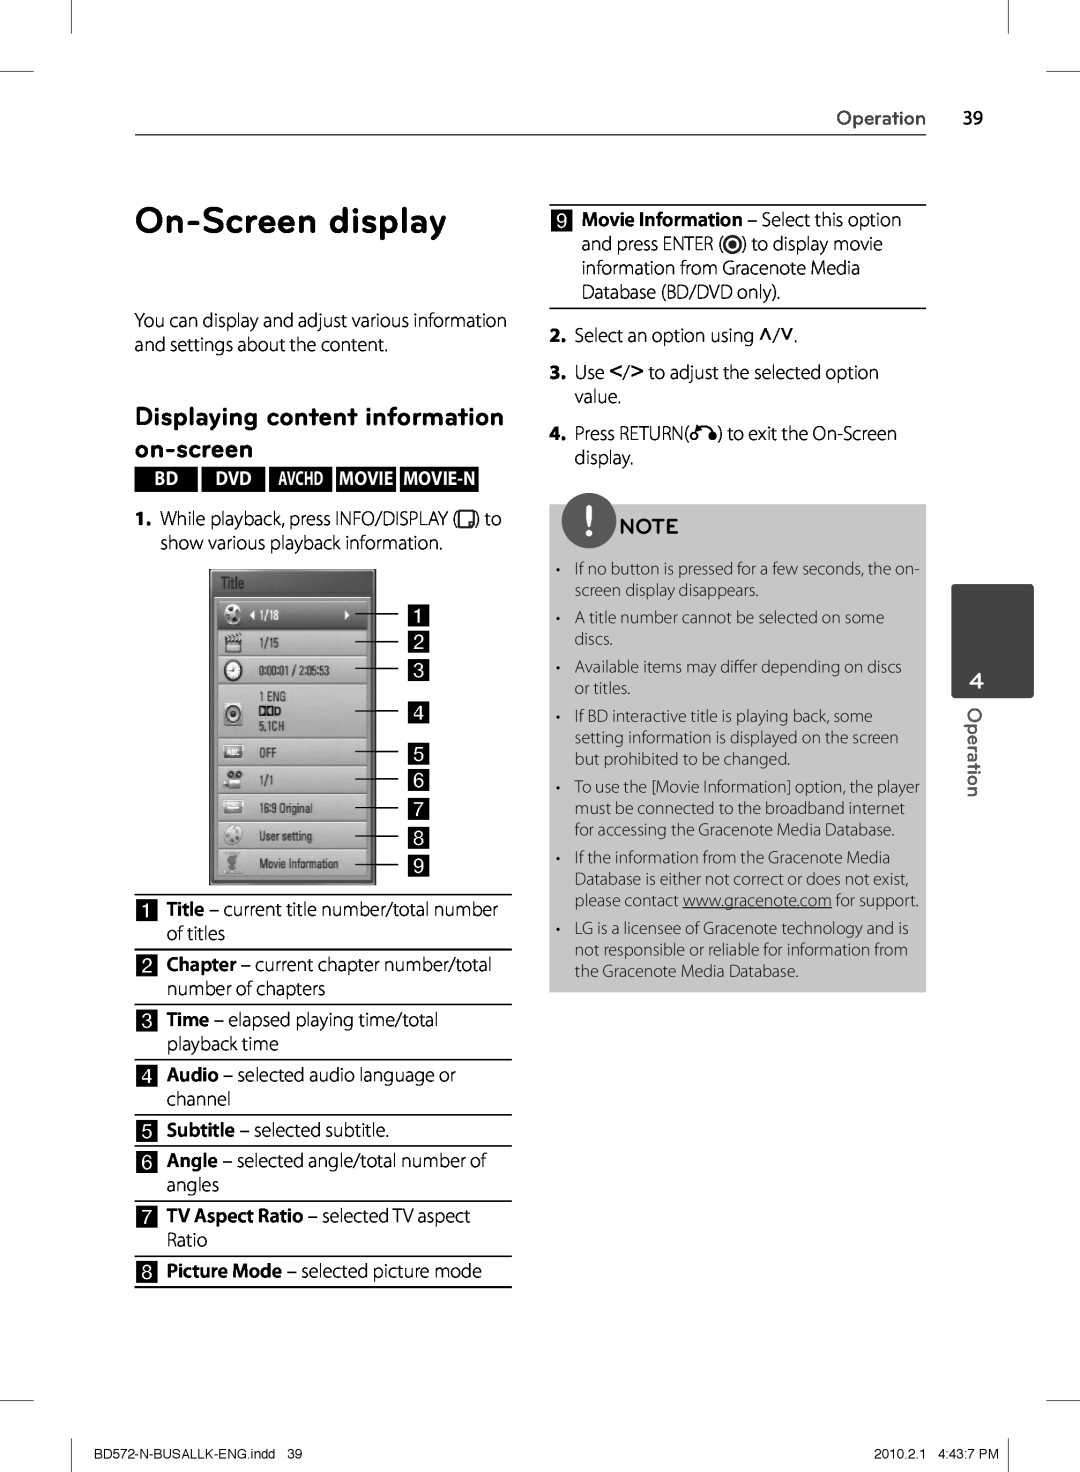 LG Electronics BD570 owner manual On-Screen display, Displaying content information on-screen, a b c d e f g h, Operation 